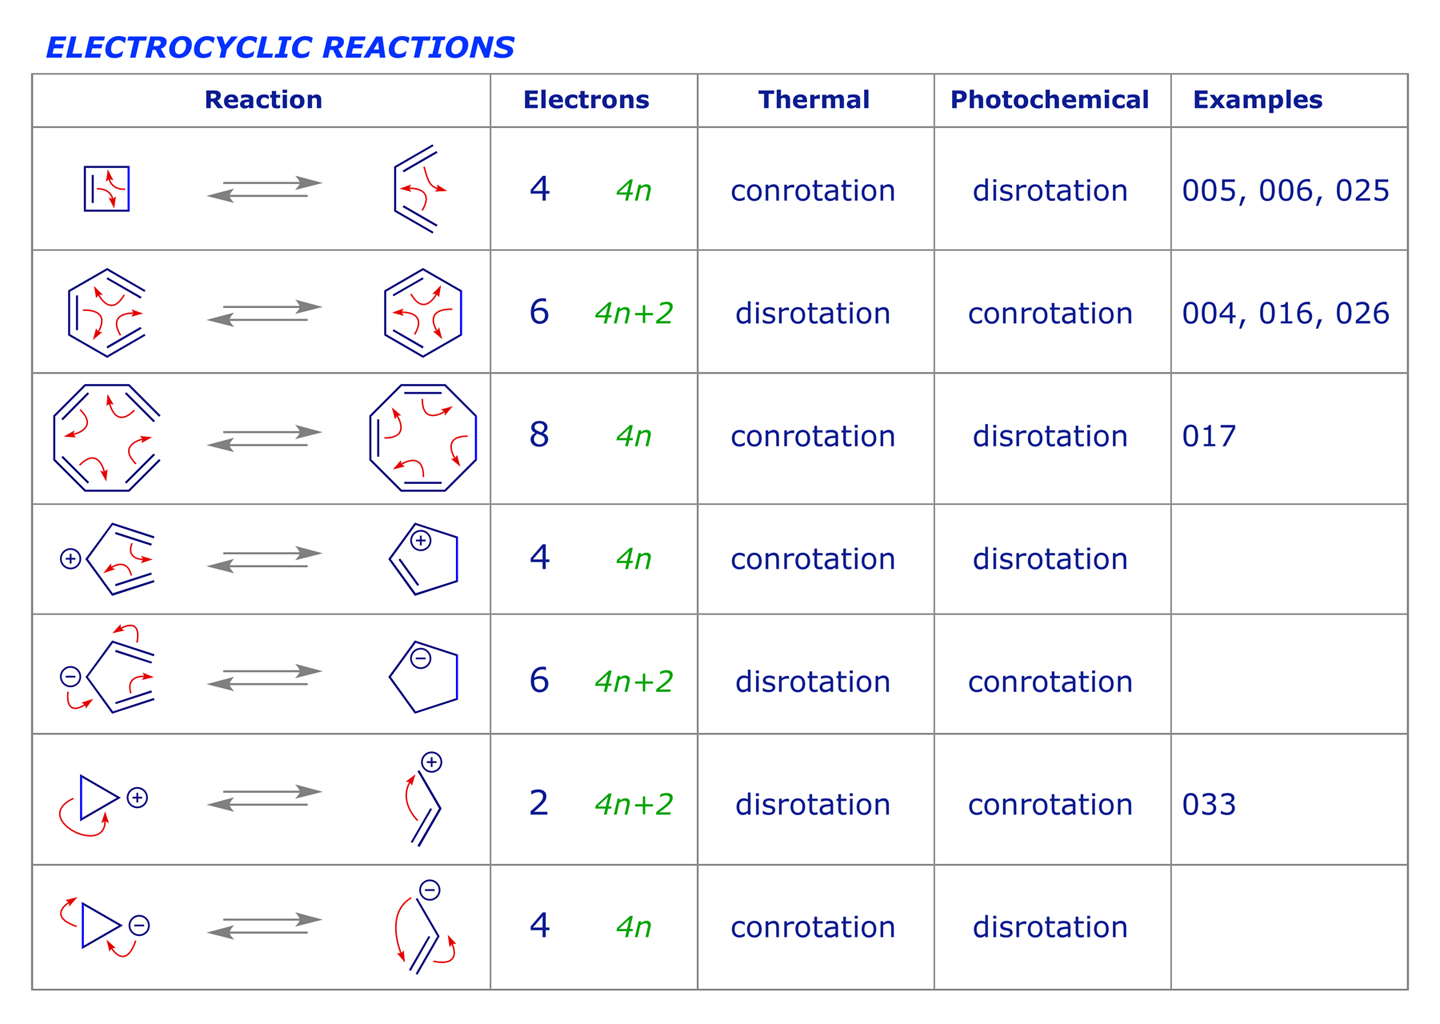 Table showing the relationship between electron count and reaction mode for electrocyclic reactions